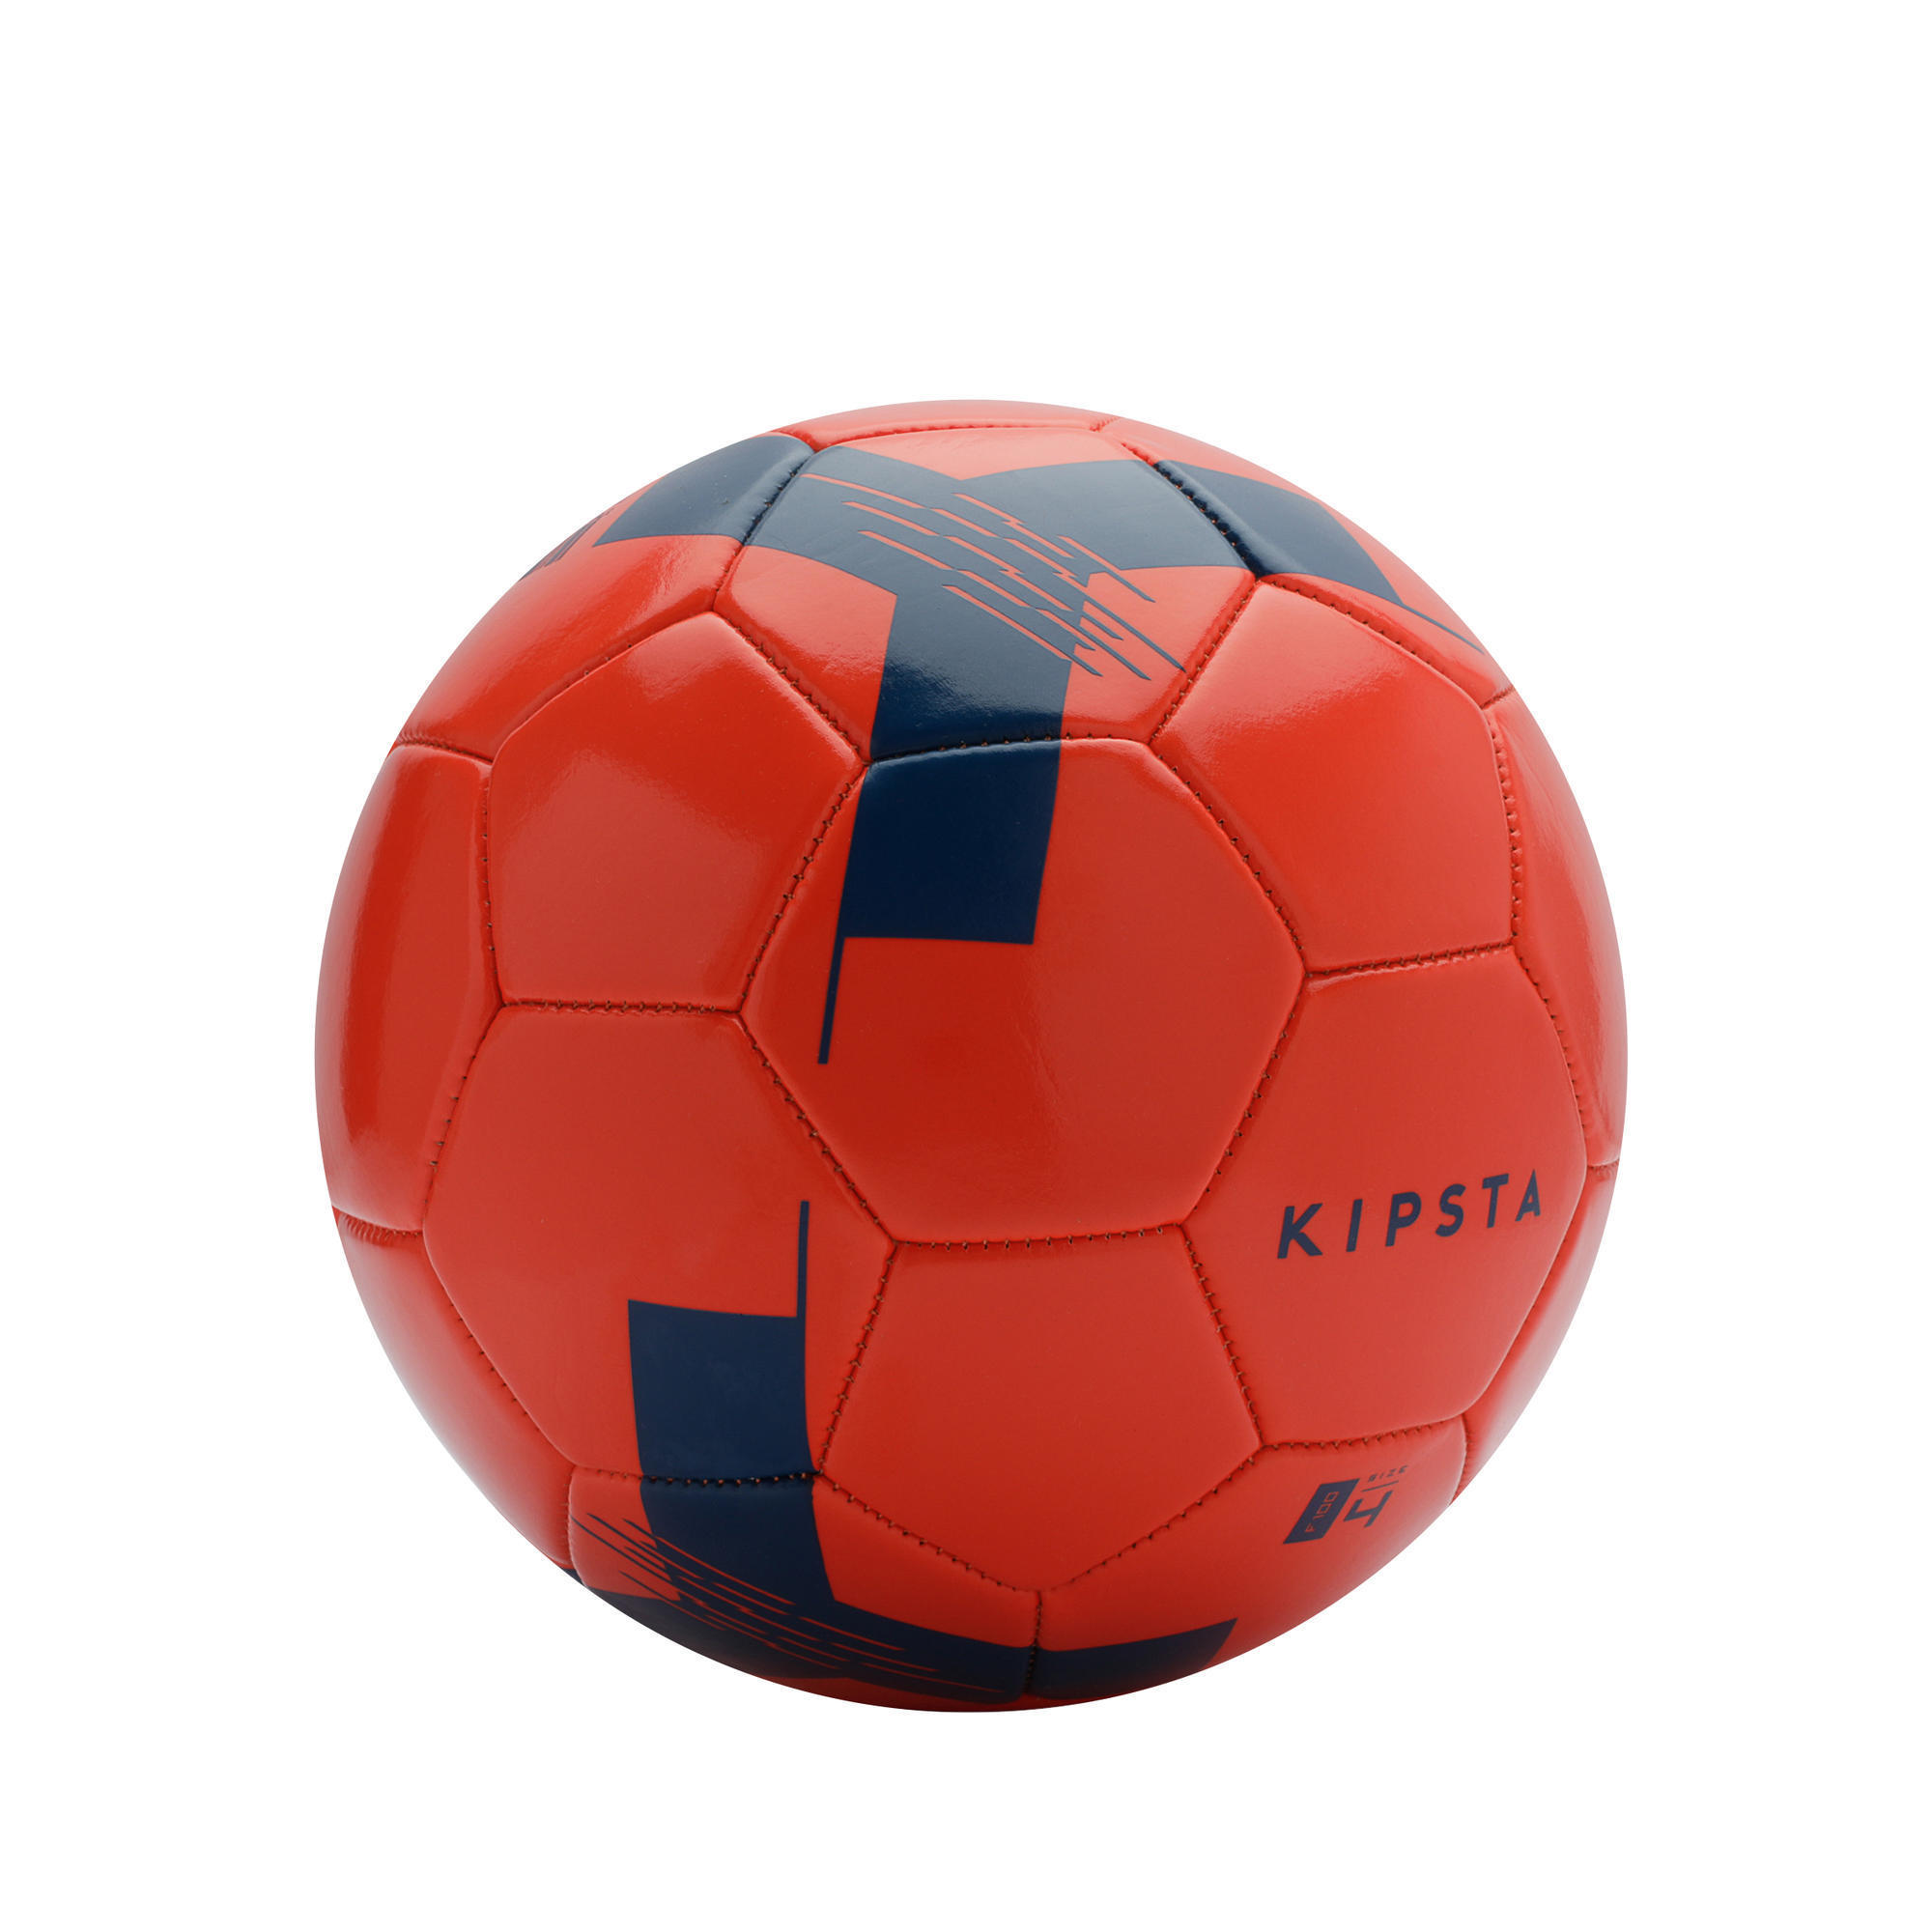 First Kick Football Size 4 Ages 8 to 12 